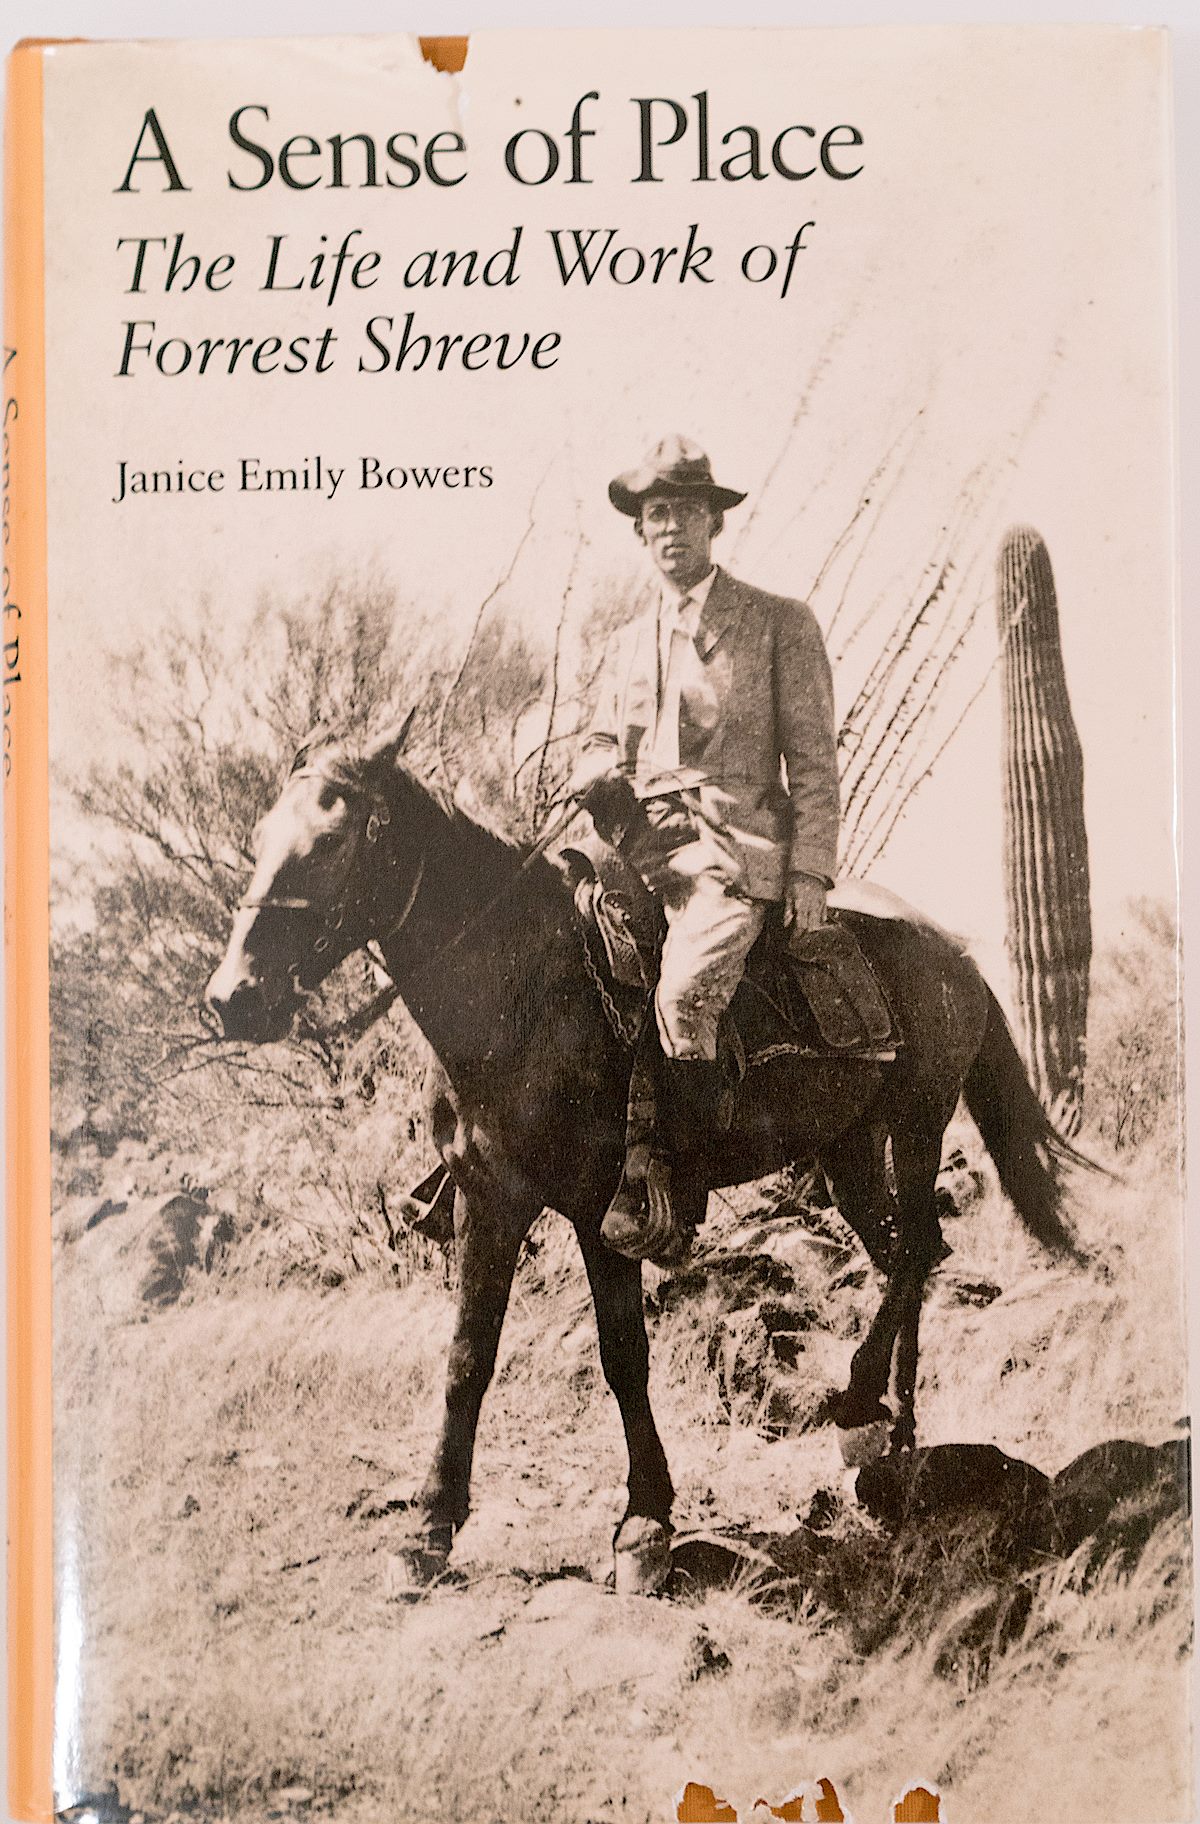 A Sense of Place: The List and Work of Forrest Shreve, Janice Emily Bowers. December 2016.